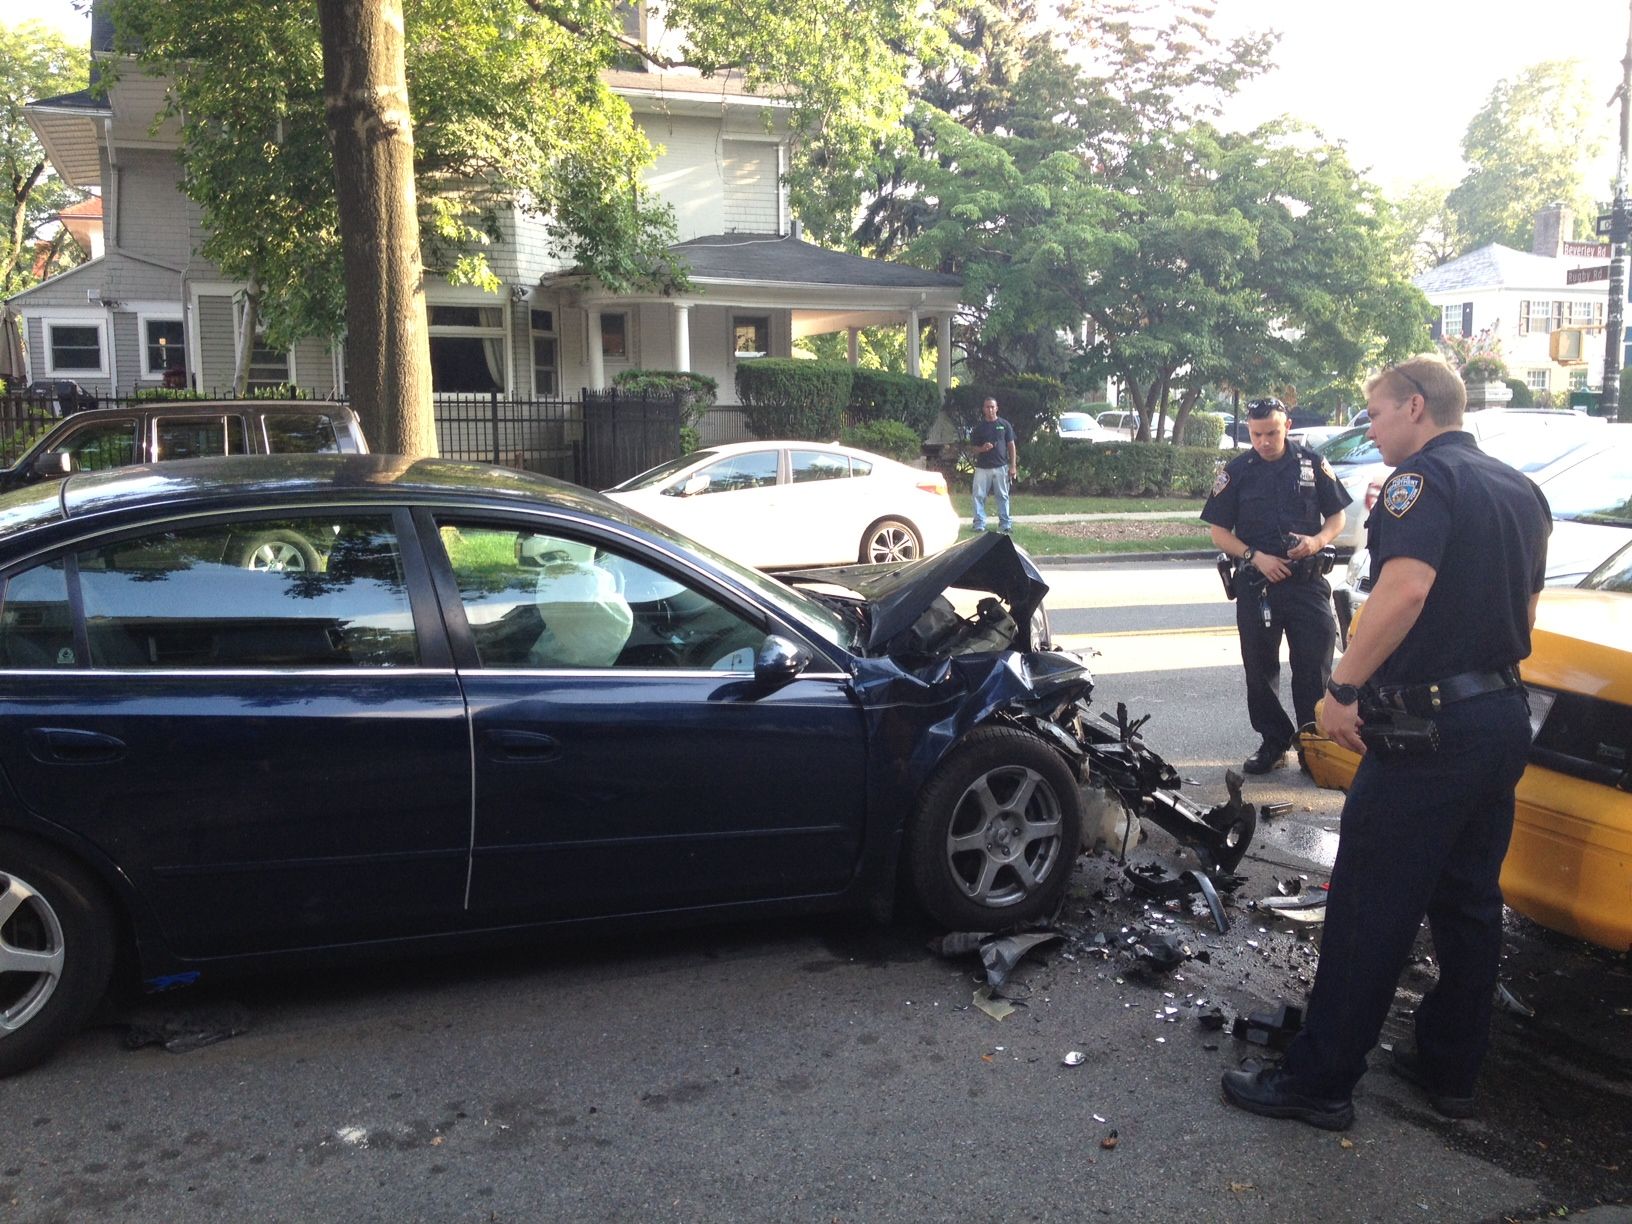 Crash On Beverley Road, Between Argyle And Rugby, Sends At Least One To The Hospital This Morning